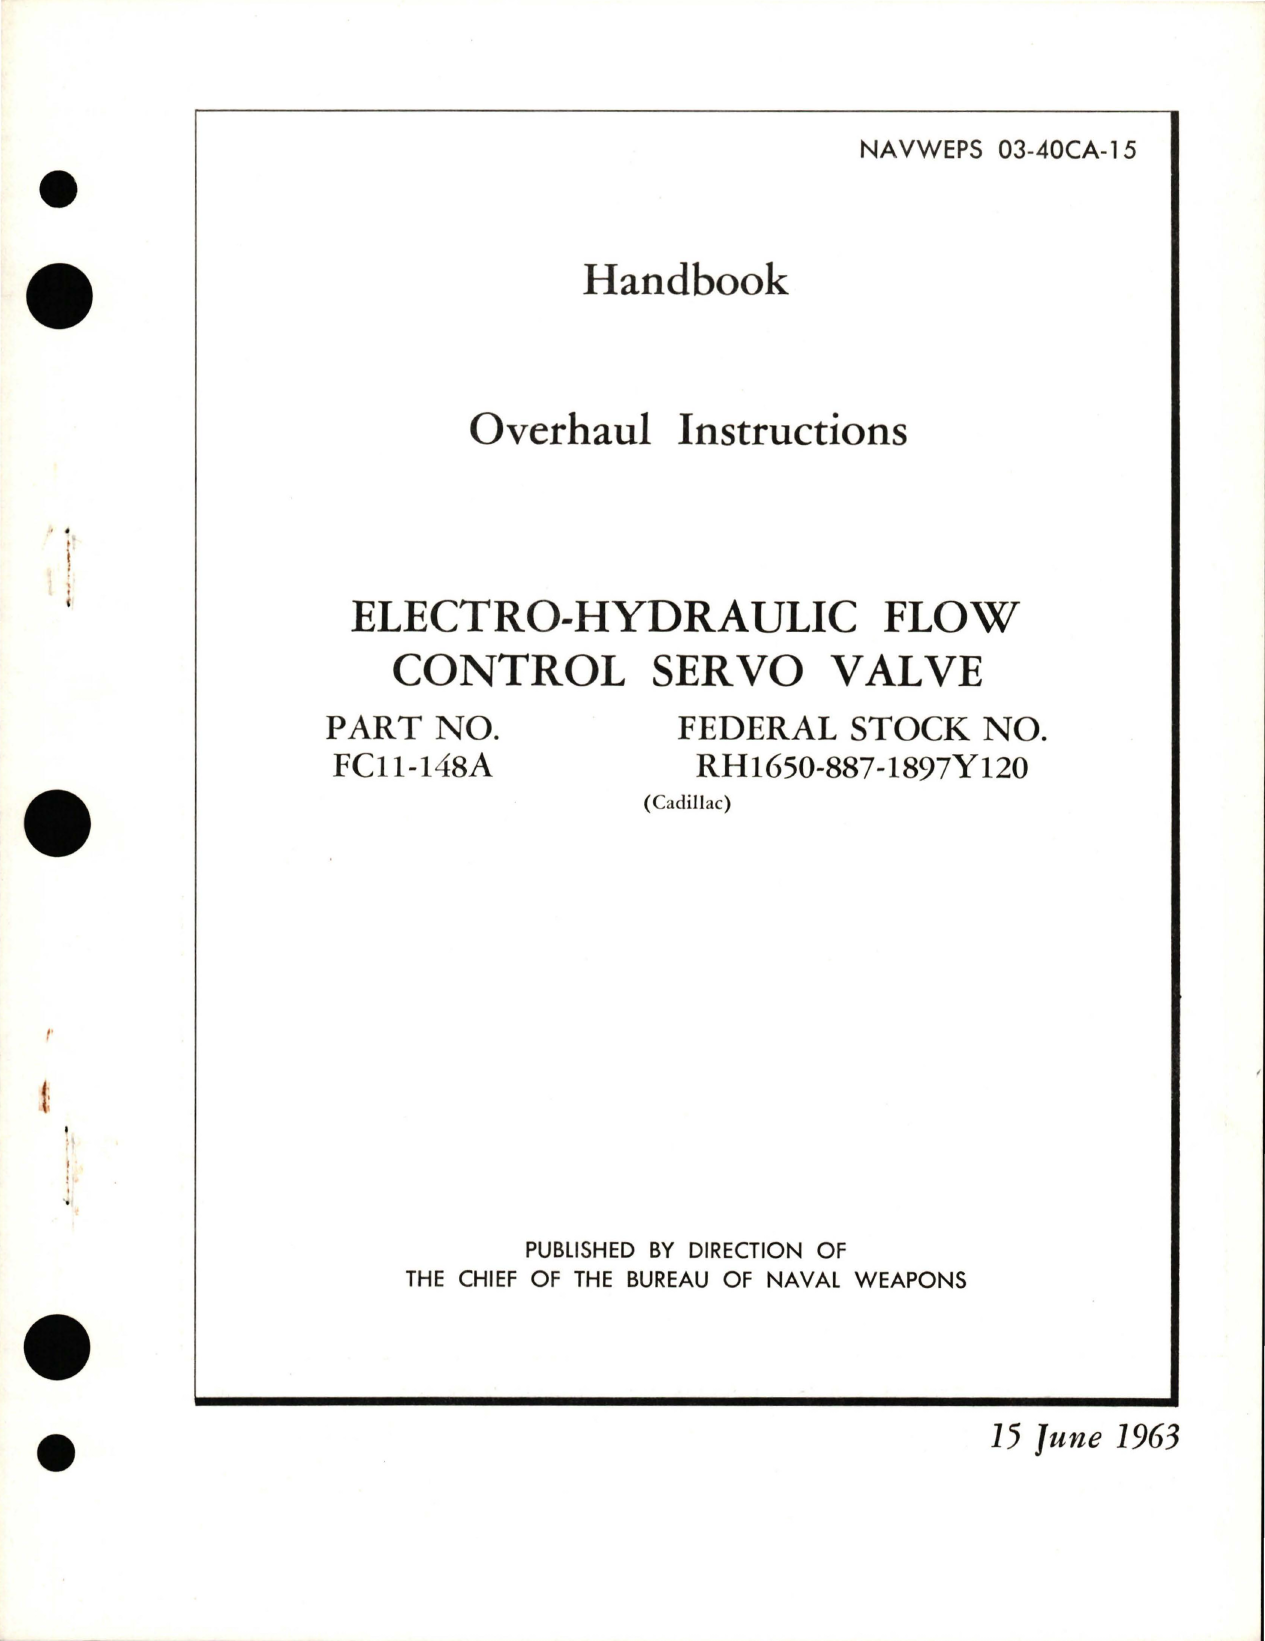 Sample page 1 from AirCorps Library document: Overhaul Instructions for Electro-Hydraulic Flow Control Servo Valve - Part FC11-148A